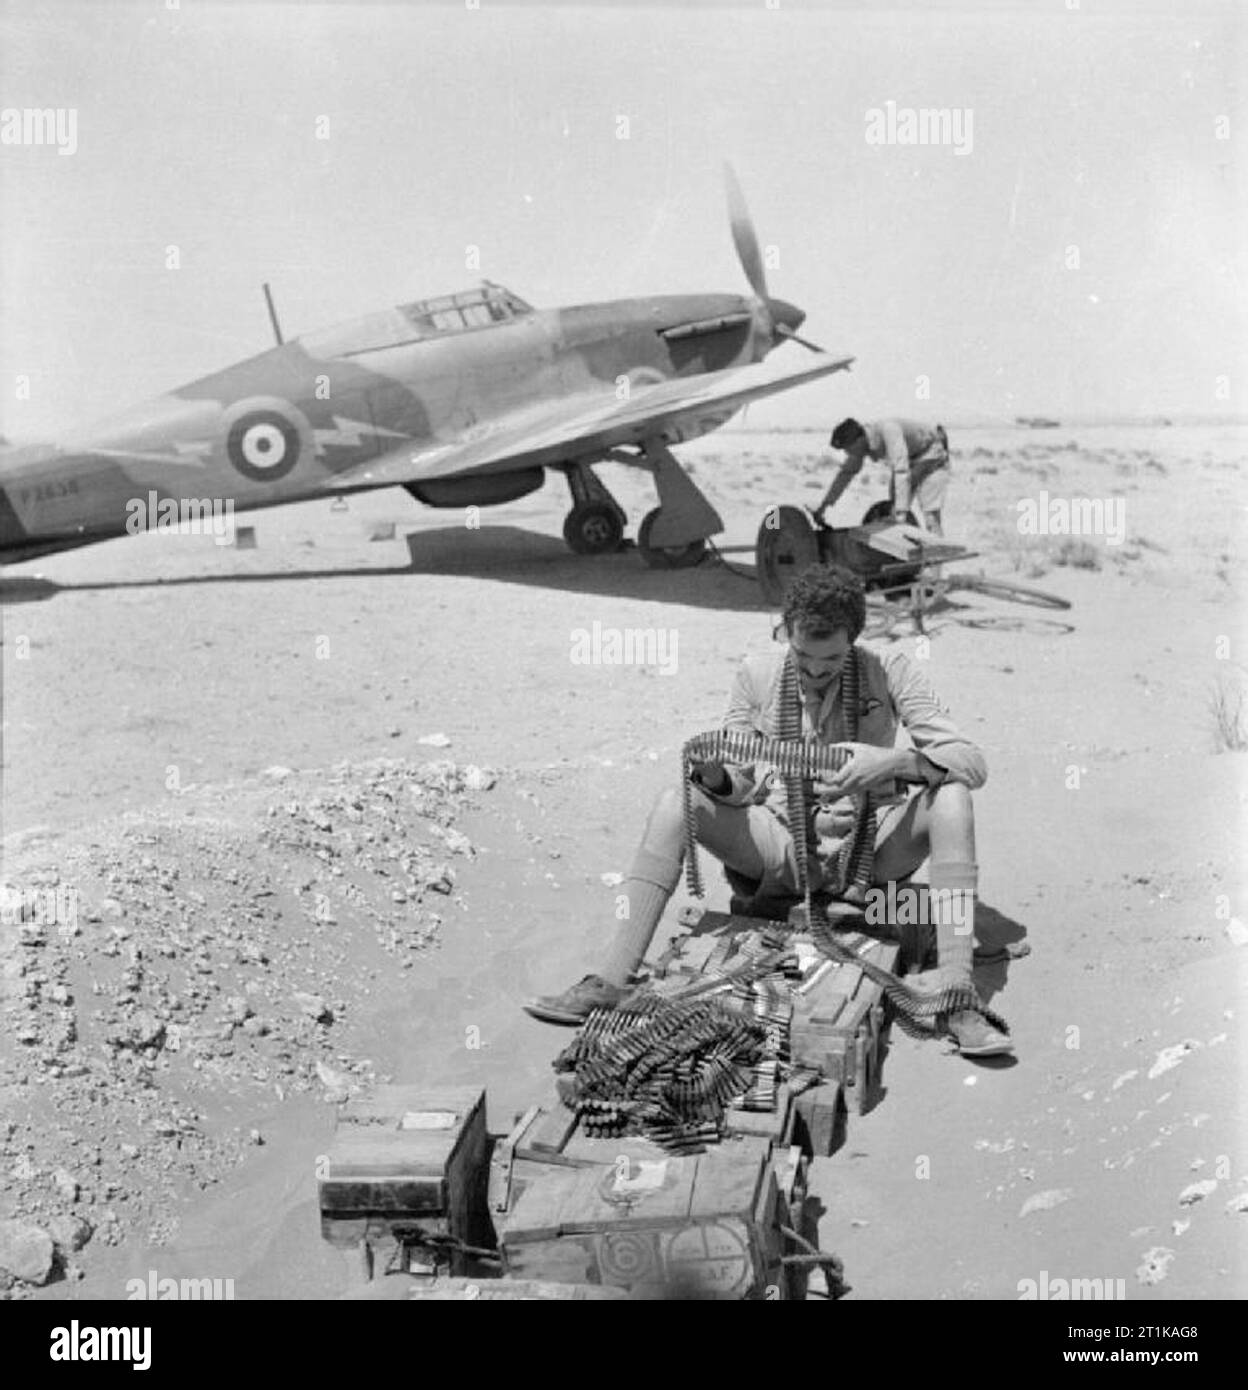 Royal Air Force Operations in the Middle East and North Africa, 1939-1943. Sergeant Pilot F H Dean of No. 274 Squadron RAF examines belts of .303 ammunition before they are installed in his aircraft at Sidi Barrani, Egypt. In the background, one of the groundcrew attaches a trolley-accumulator to Hawker Hurricane Mark I, P2638, sporting the yellow lightning flash emblem (later changed to blue) which became 274 Squadron's unofficial insignia at about this time. Sergeant Dean was shot down and killed on 15 May 1941, when his section of Hurricanes fought with Messerschmitt Bf 109s near Halfaya at Stock Photo